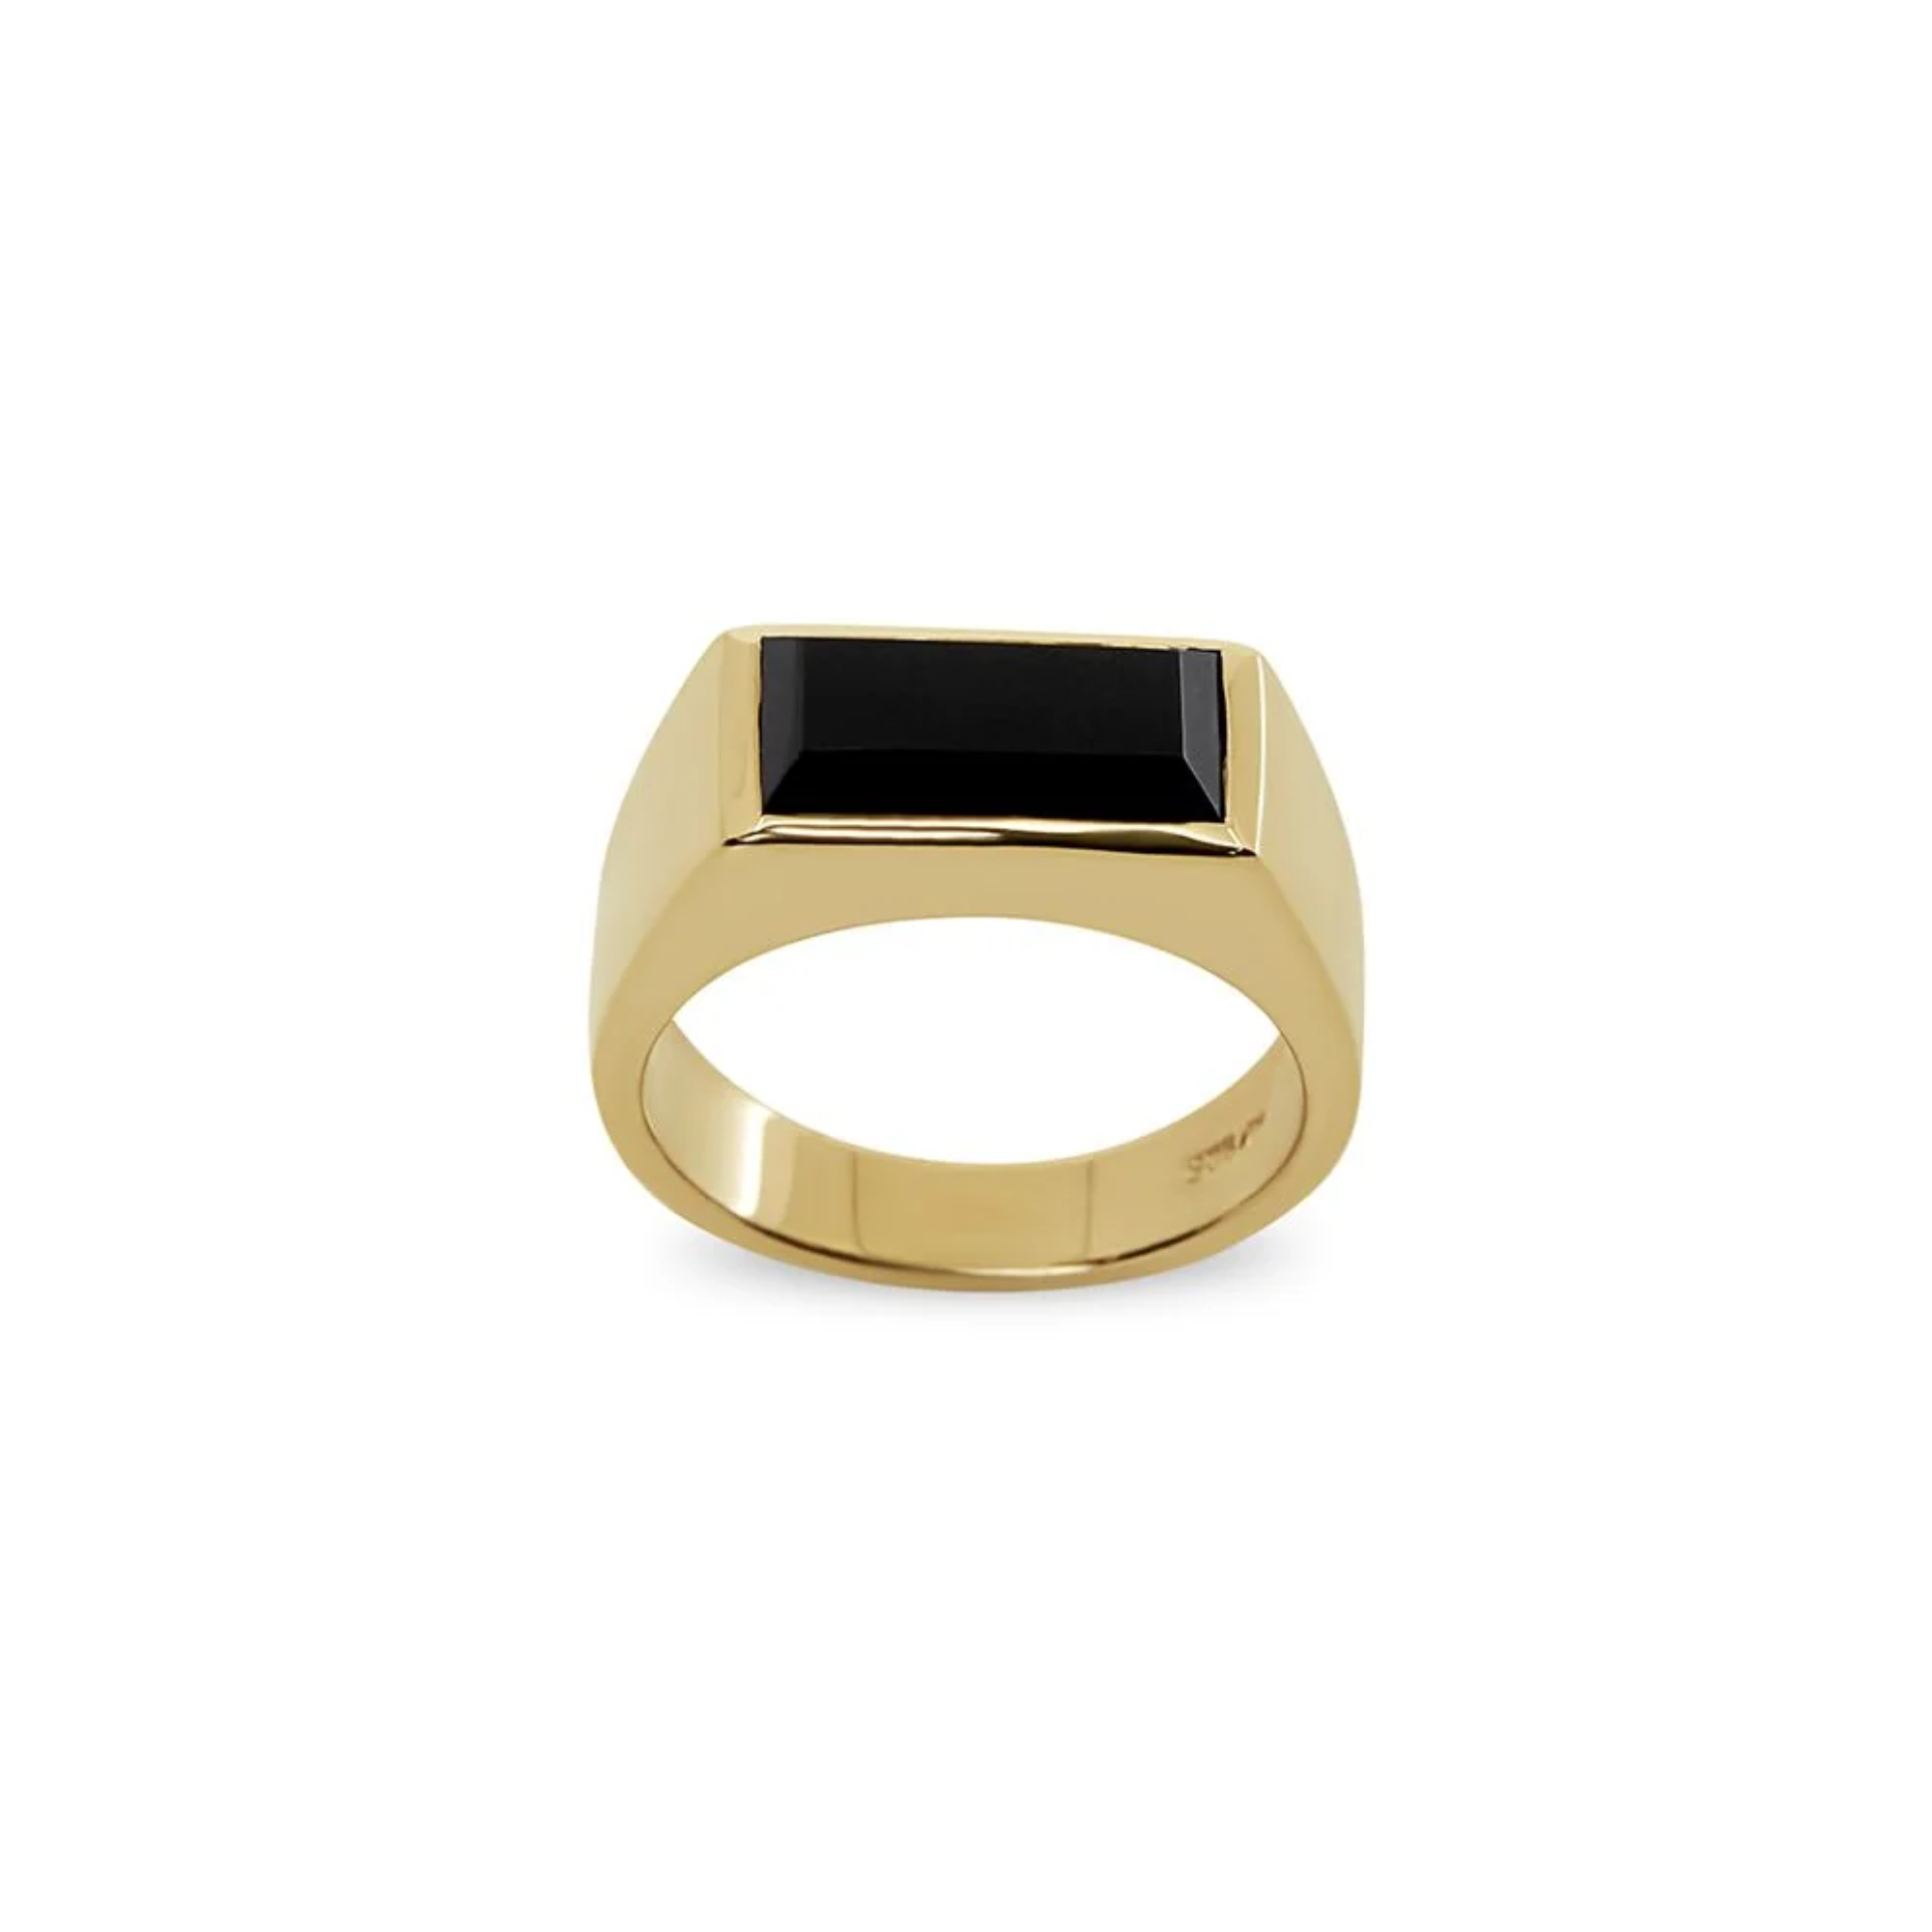 THE ONYX RECTANGLE RING